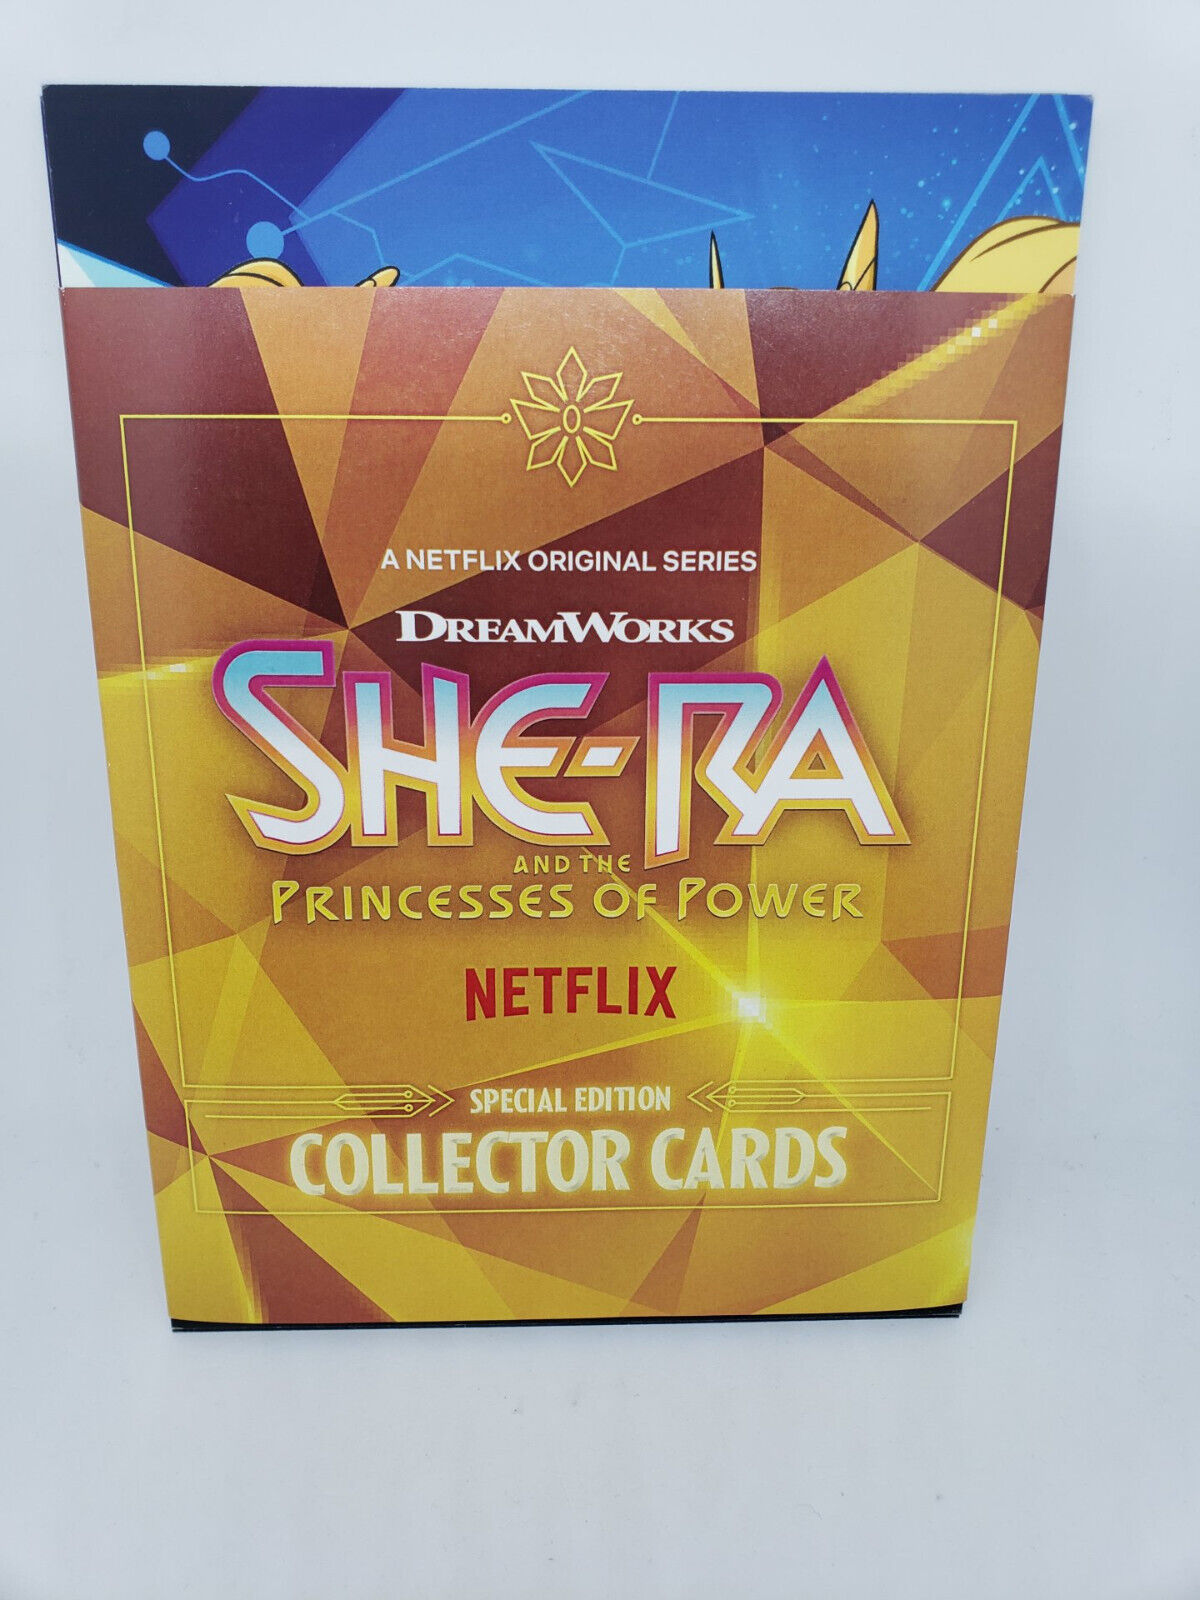 She-Ra: Princesses of Power Special Edition Collector Cards